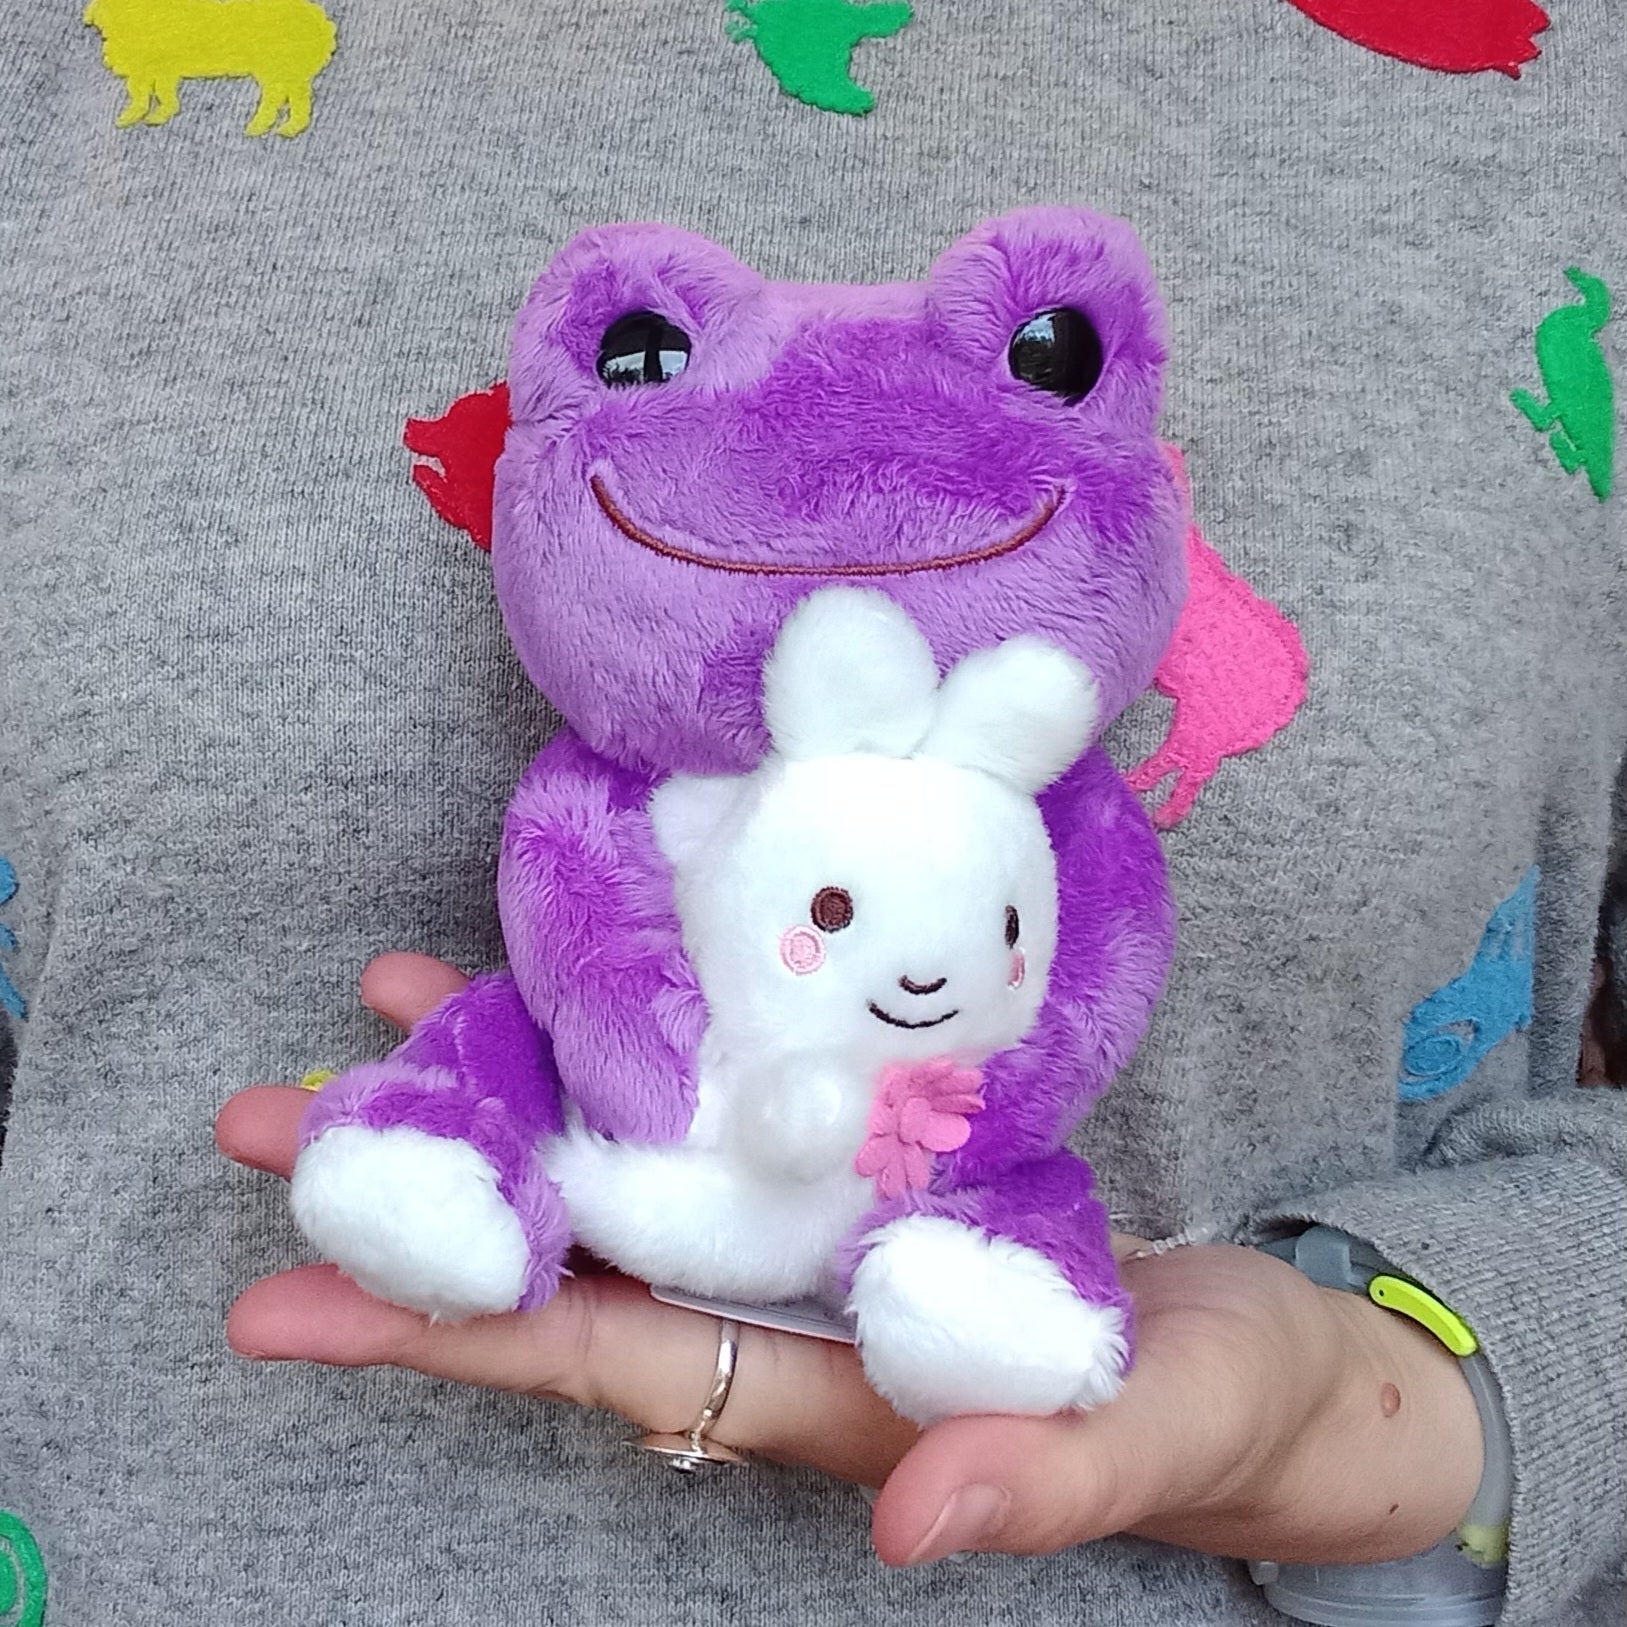 Purple Pickles the Frog with bunny friend (20cm)